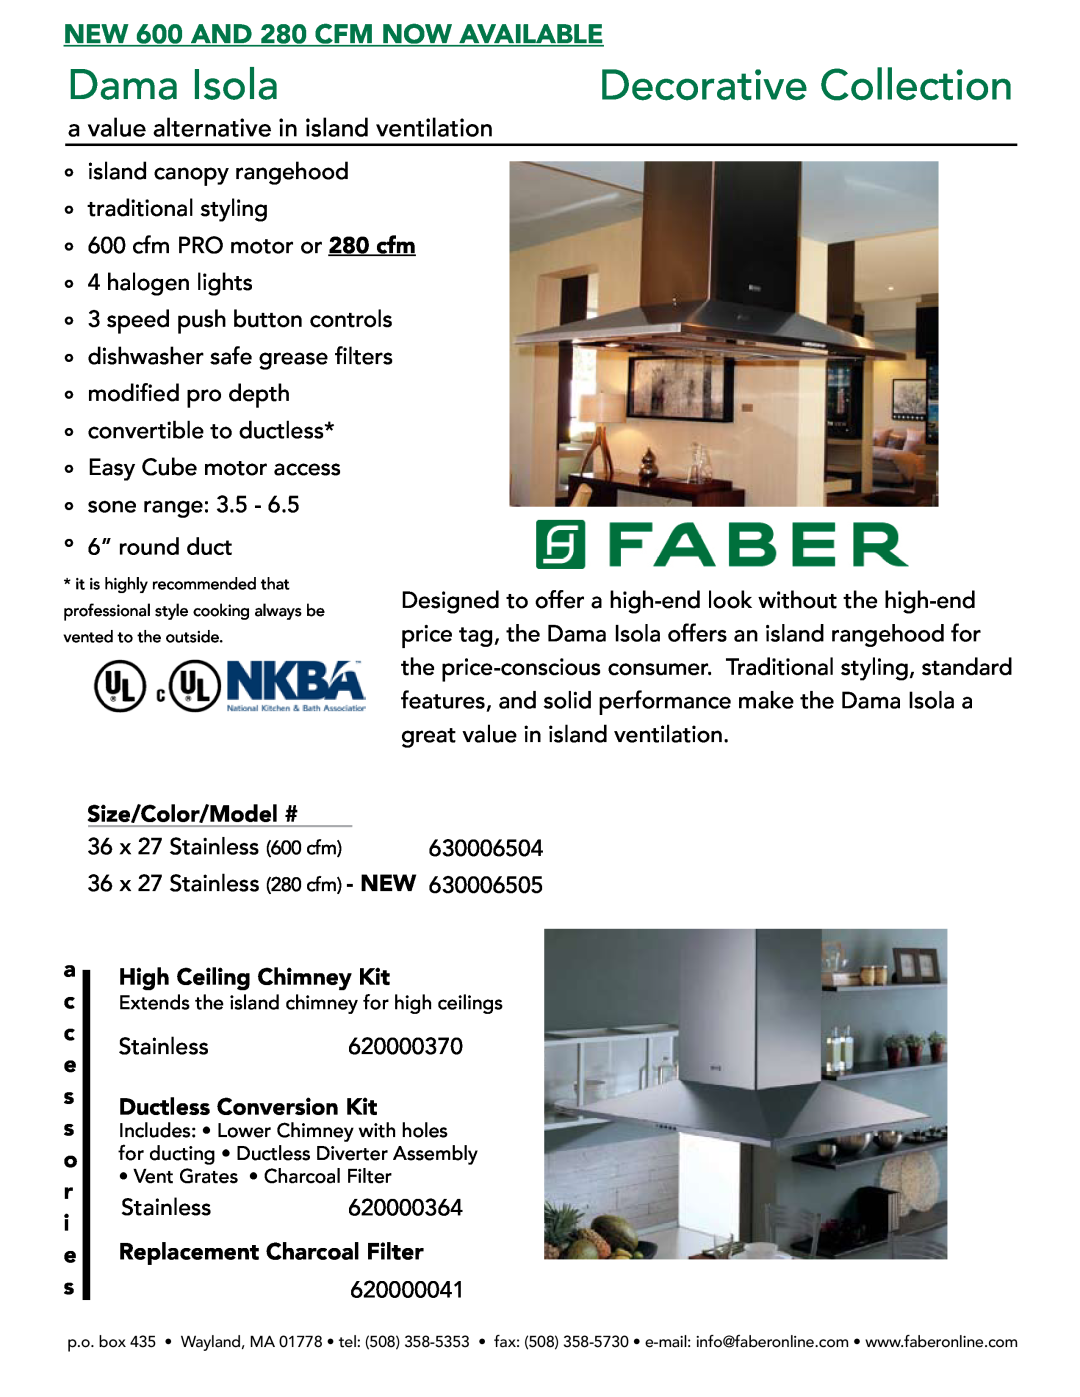 Faber 620000041 manual a c c e s s o r i e s, Size/Color/Model #, High Ceiling Chimney Kit, Ductless Conversion Kit 